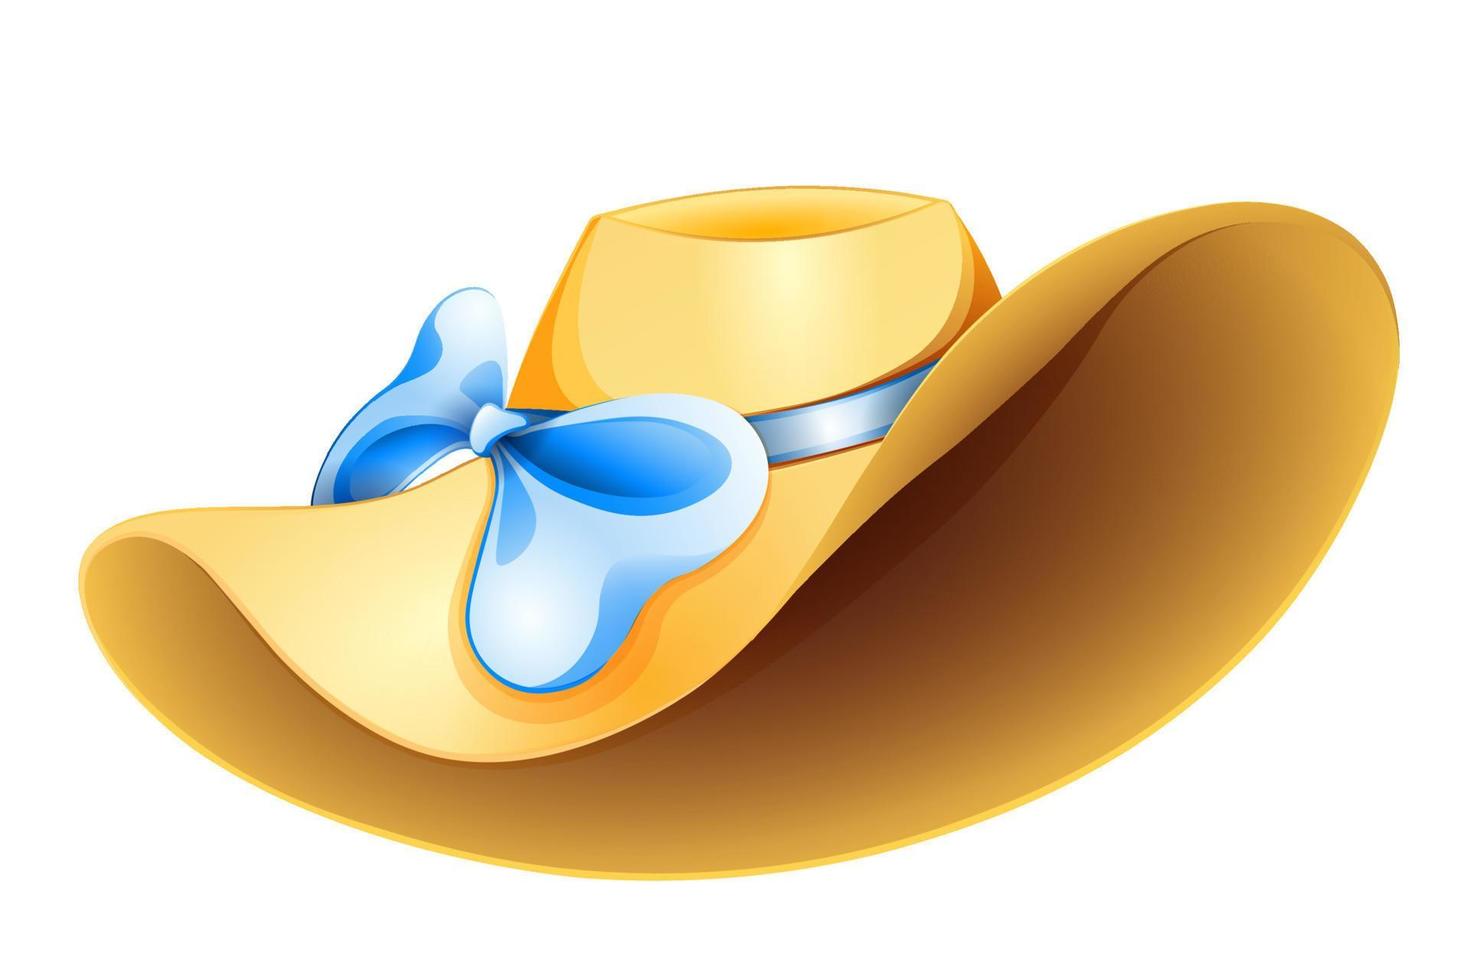 Straw hat cartoon with blue bow vector